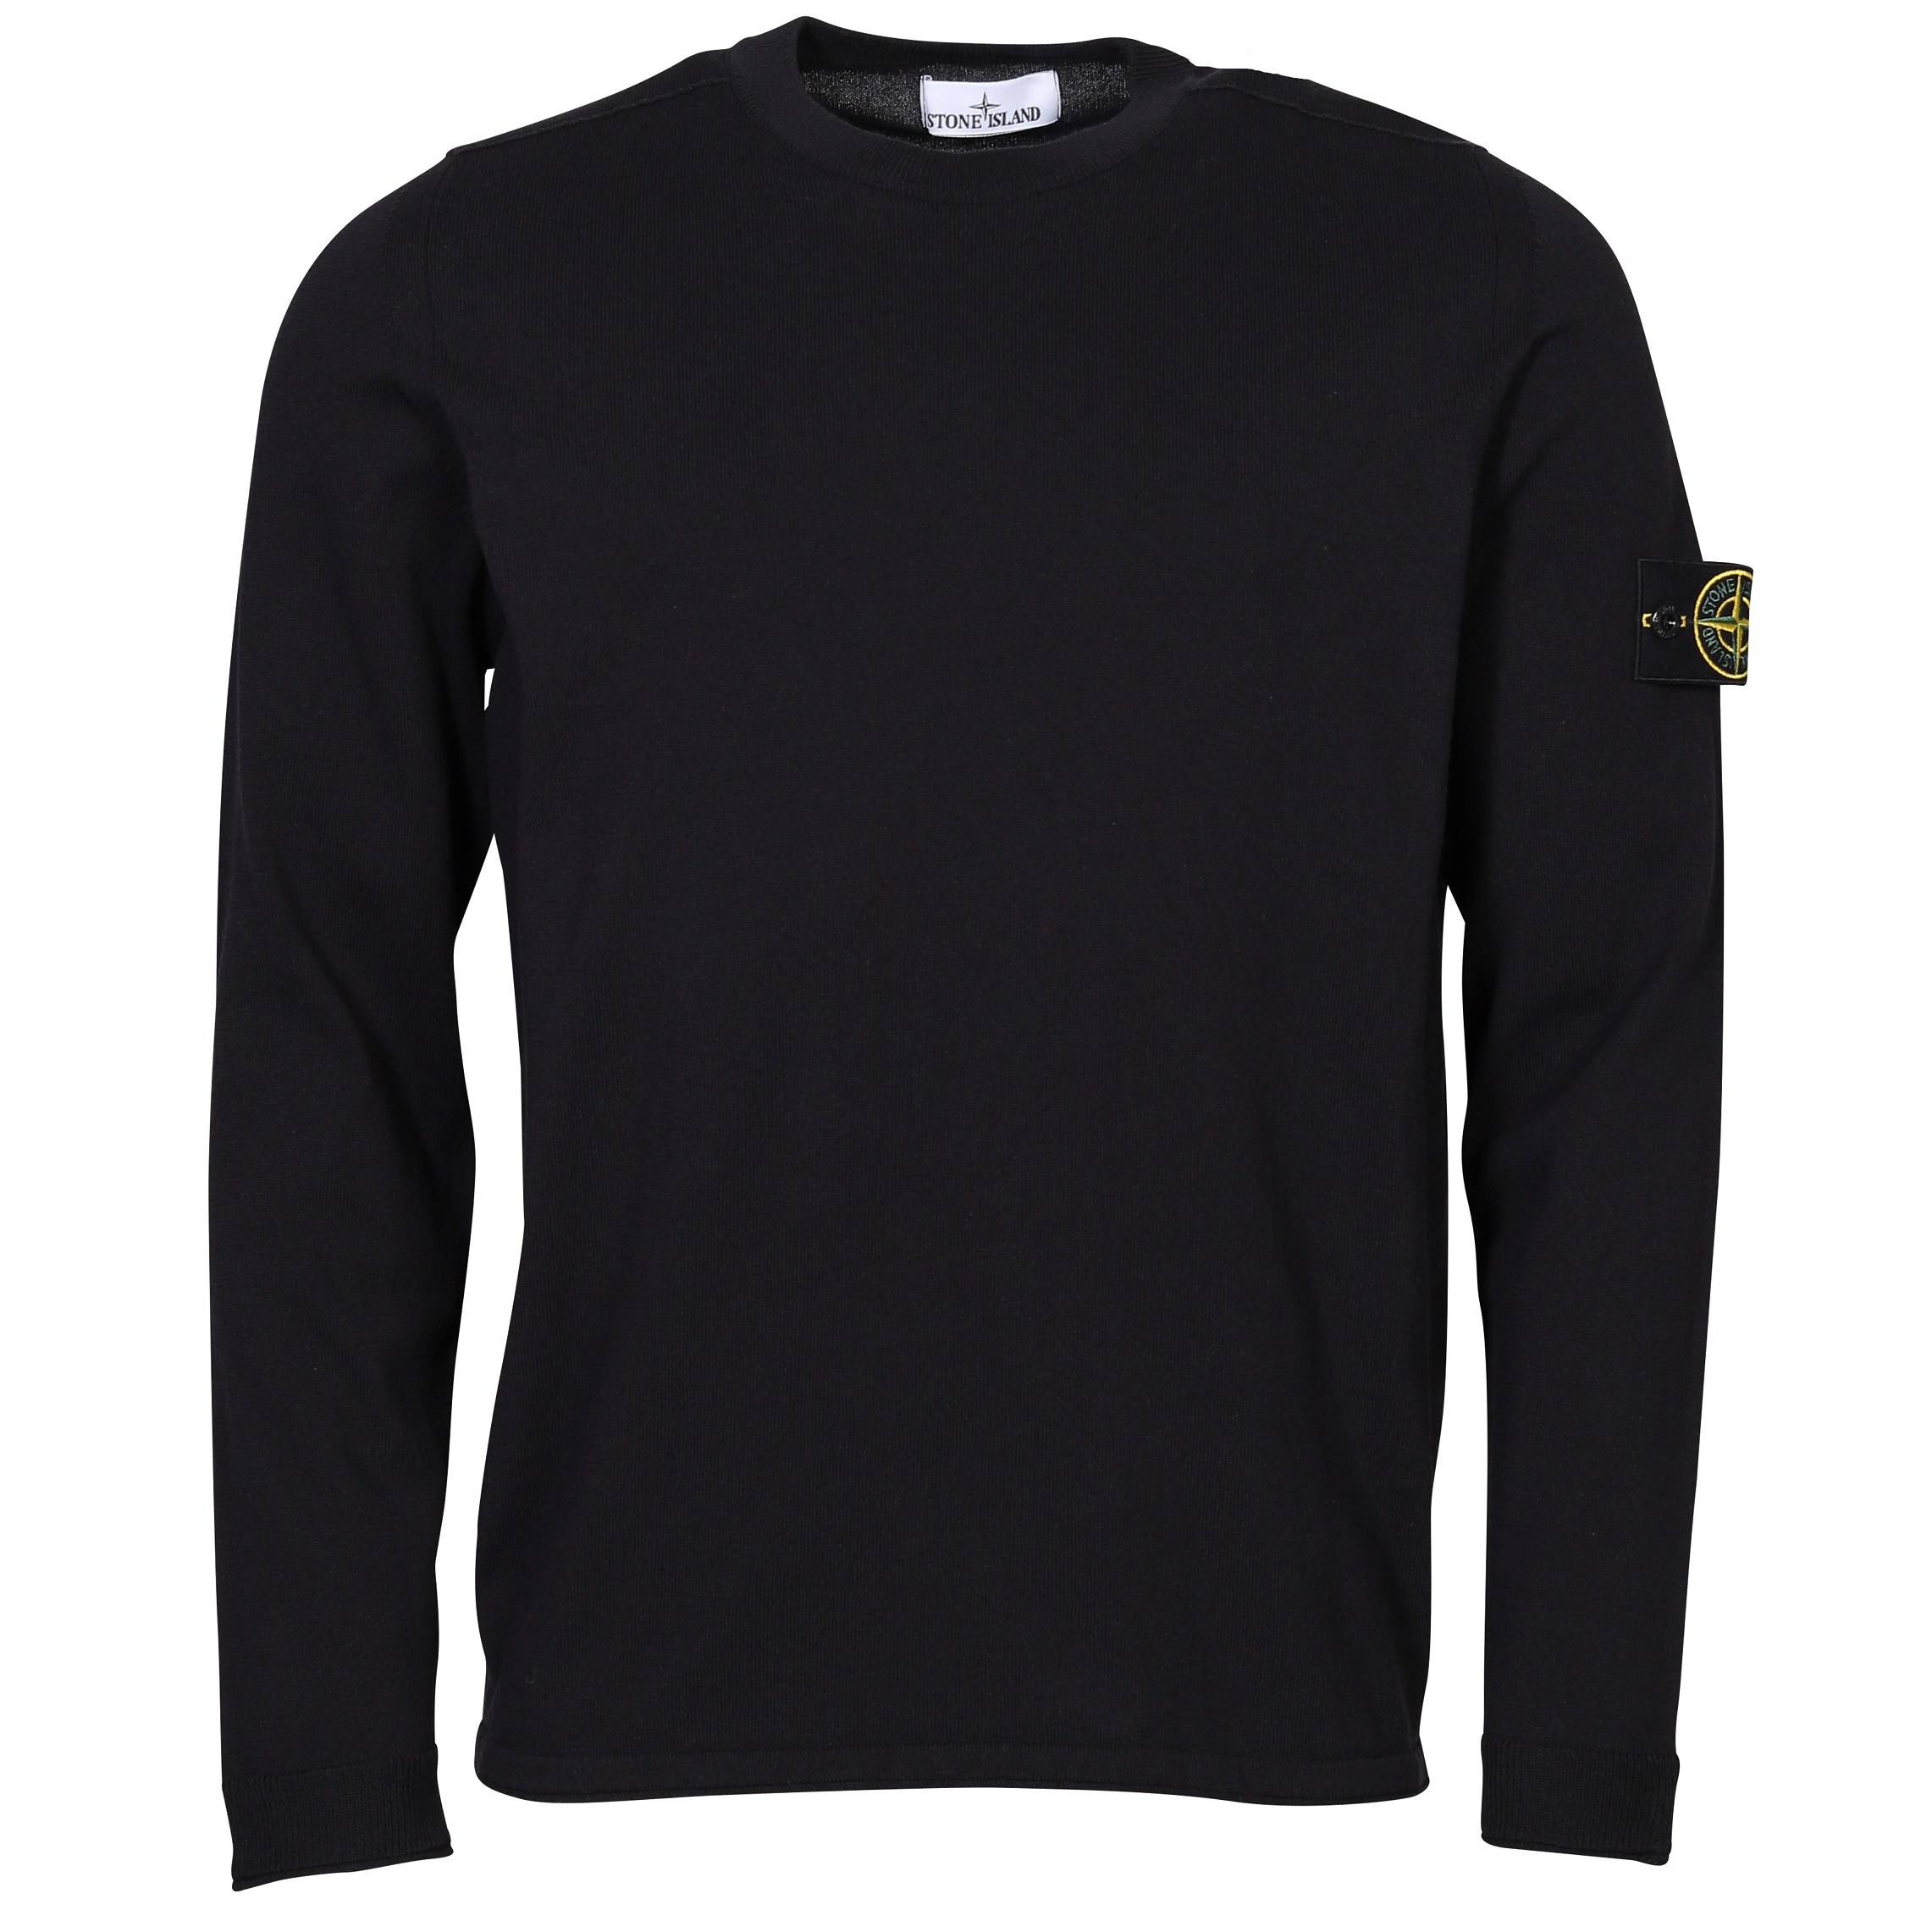 STONE ISLAND Cotton Knit Pullover in Navy Blue L